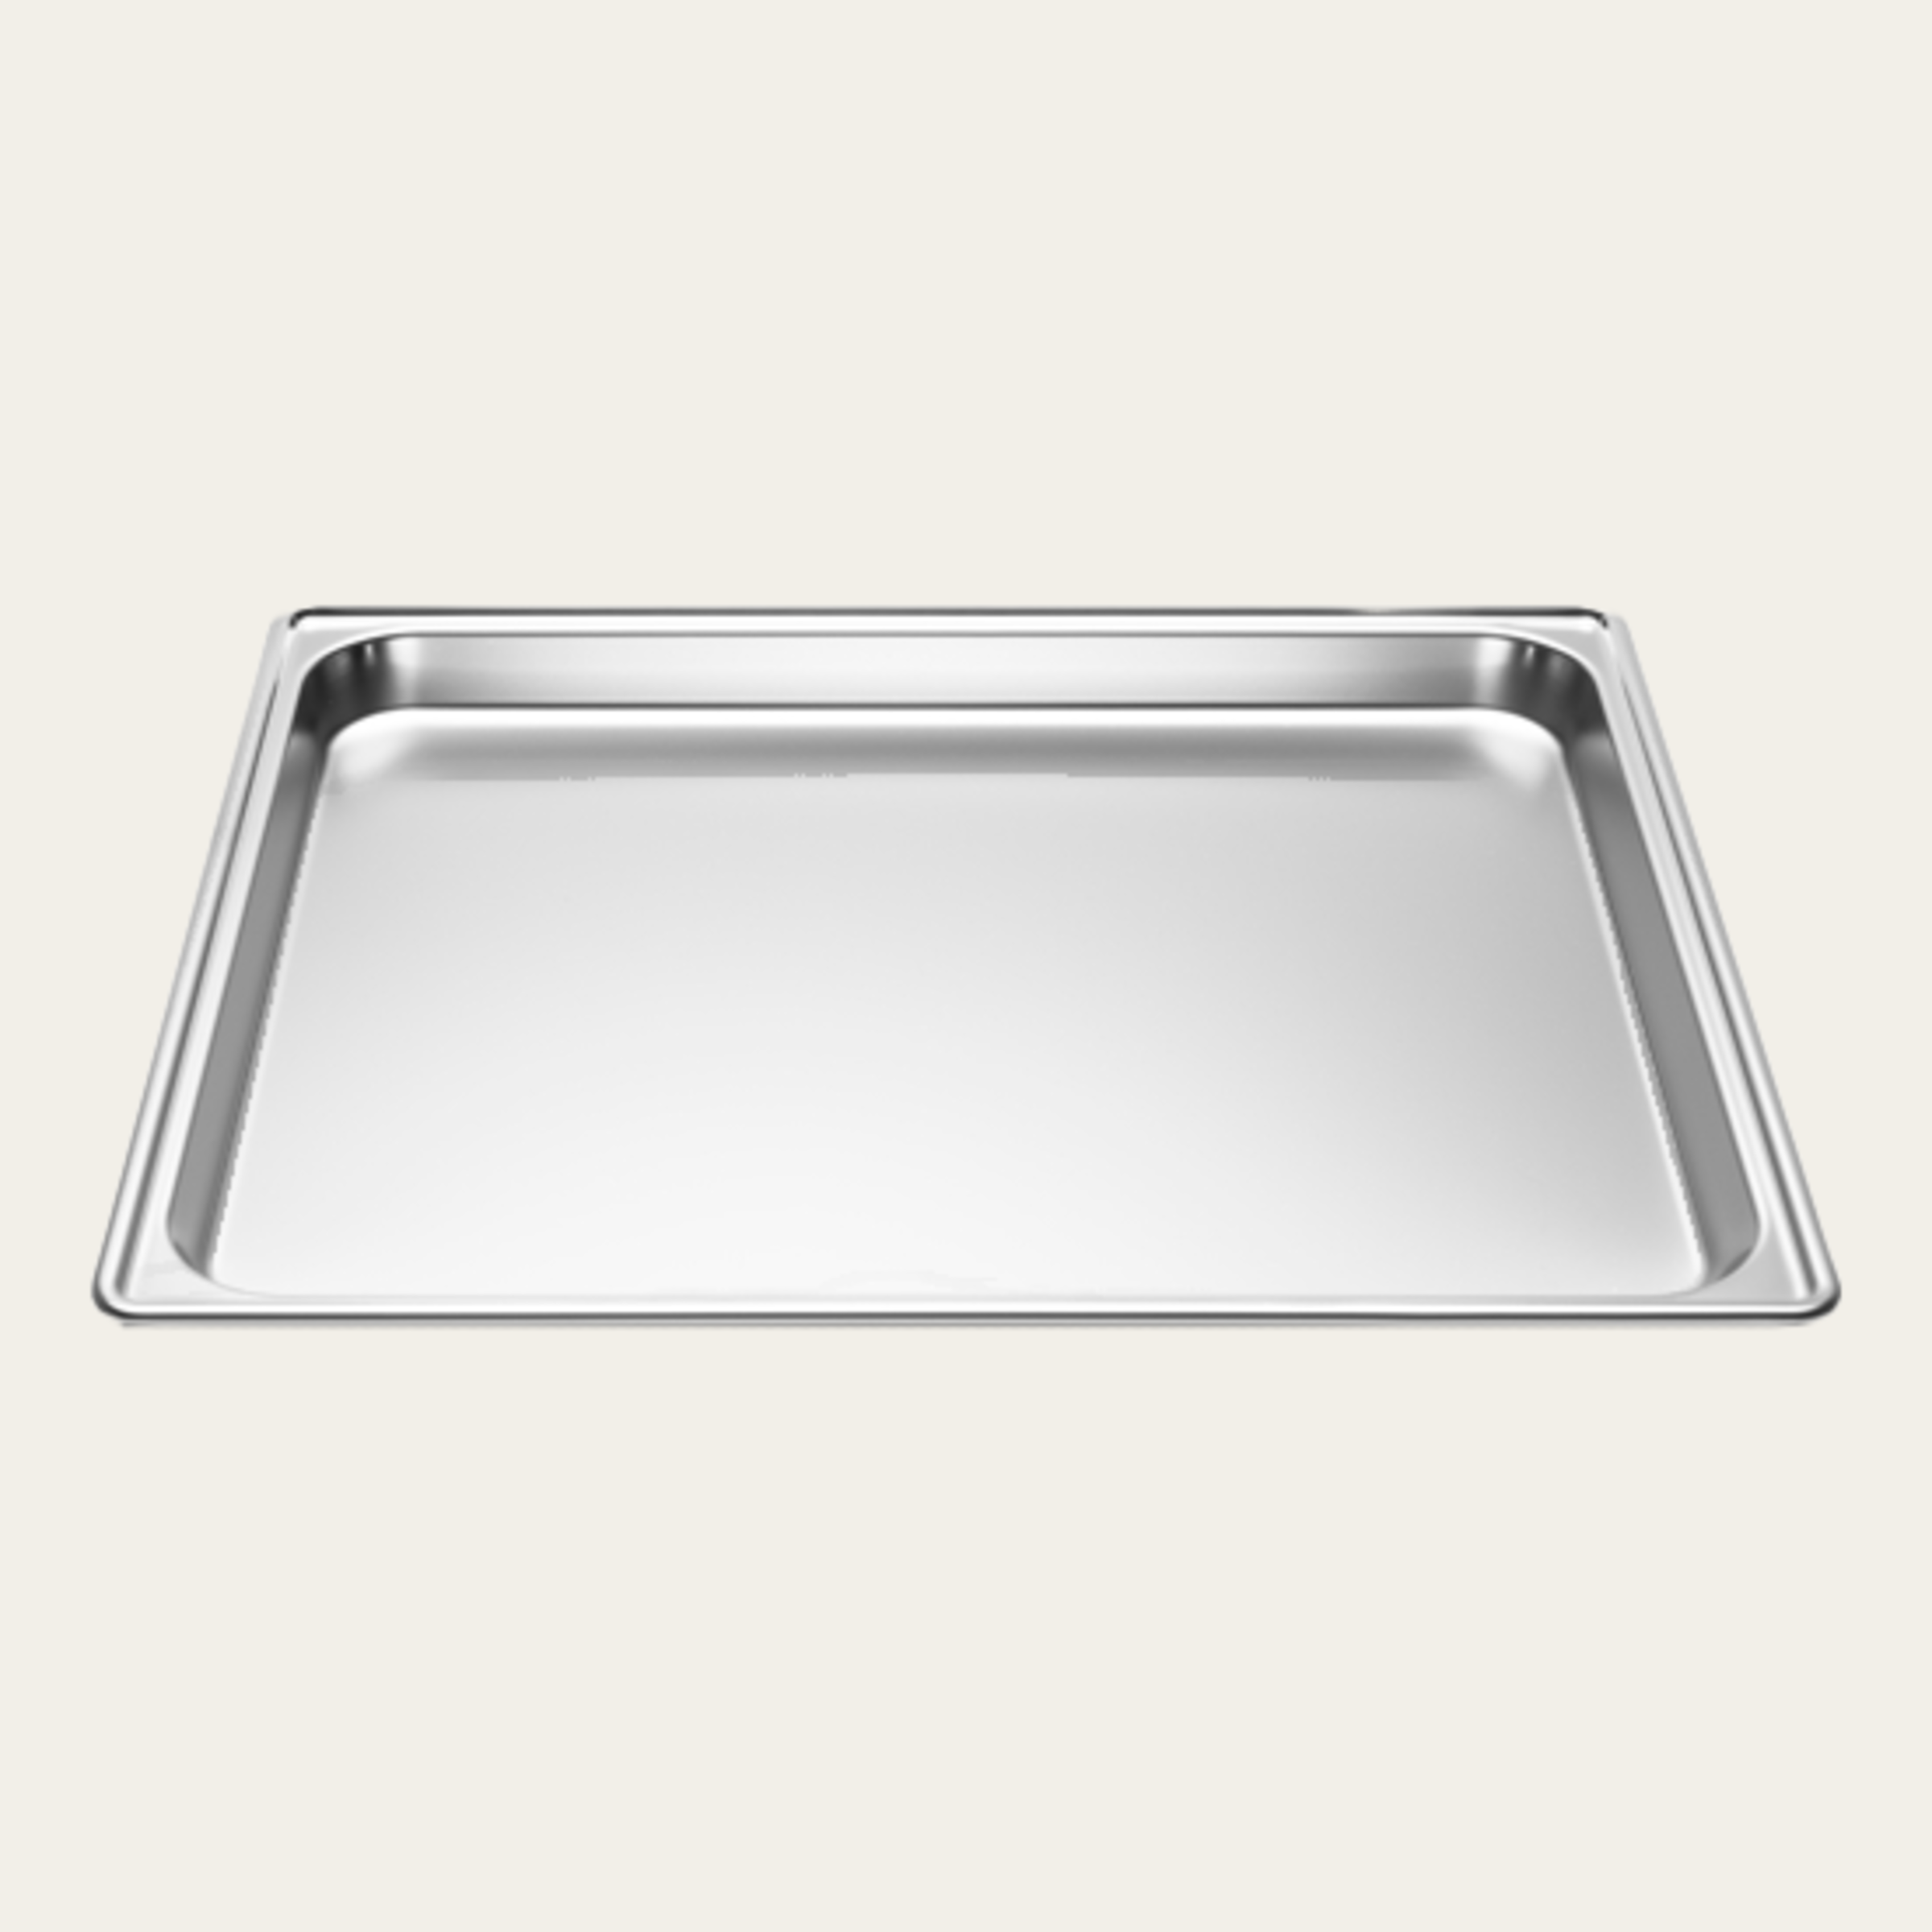 Stainless steel tray, 430 x 370 x 25mm